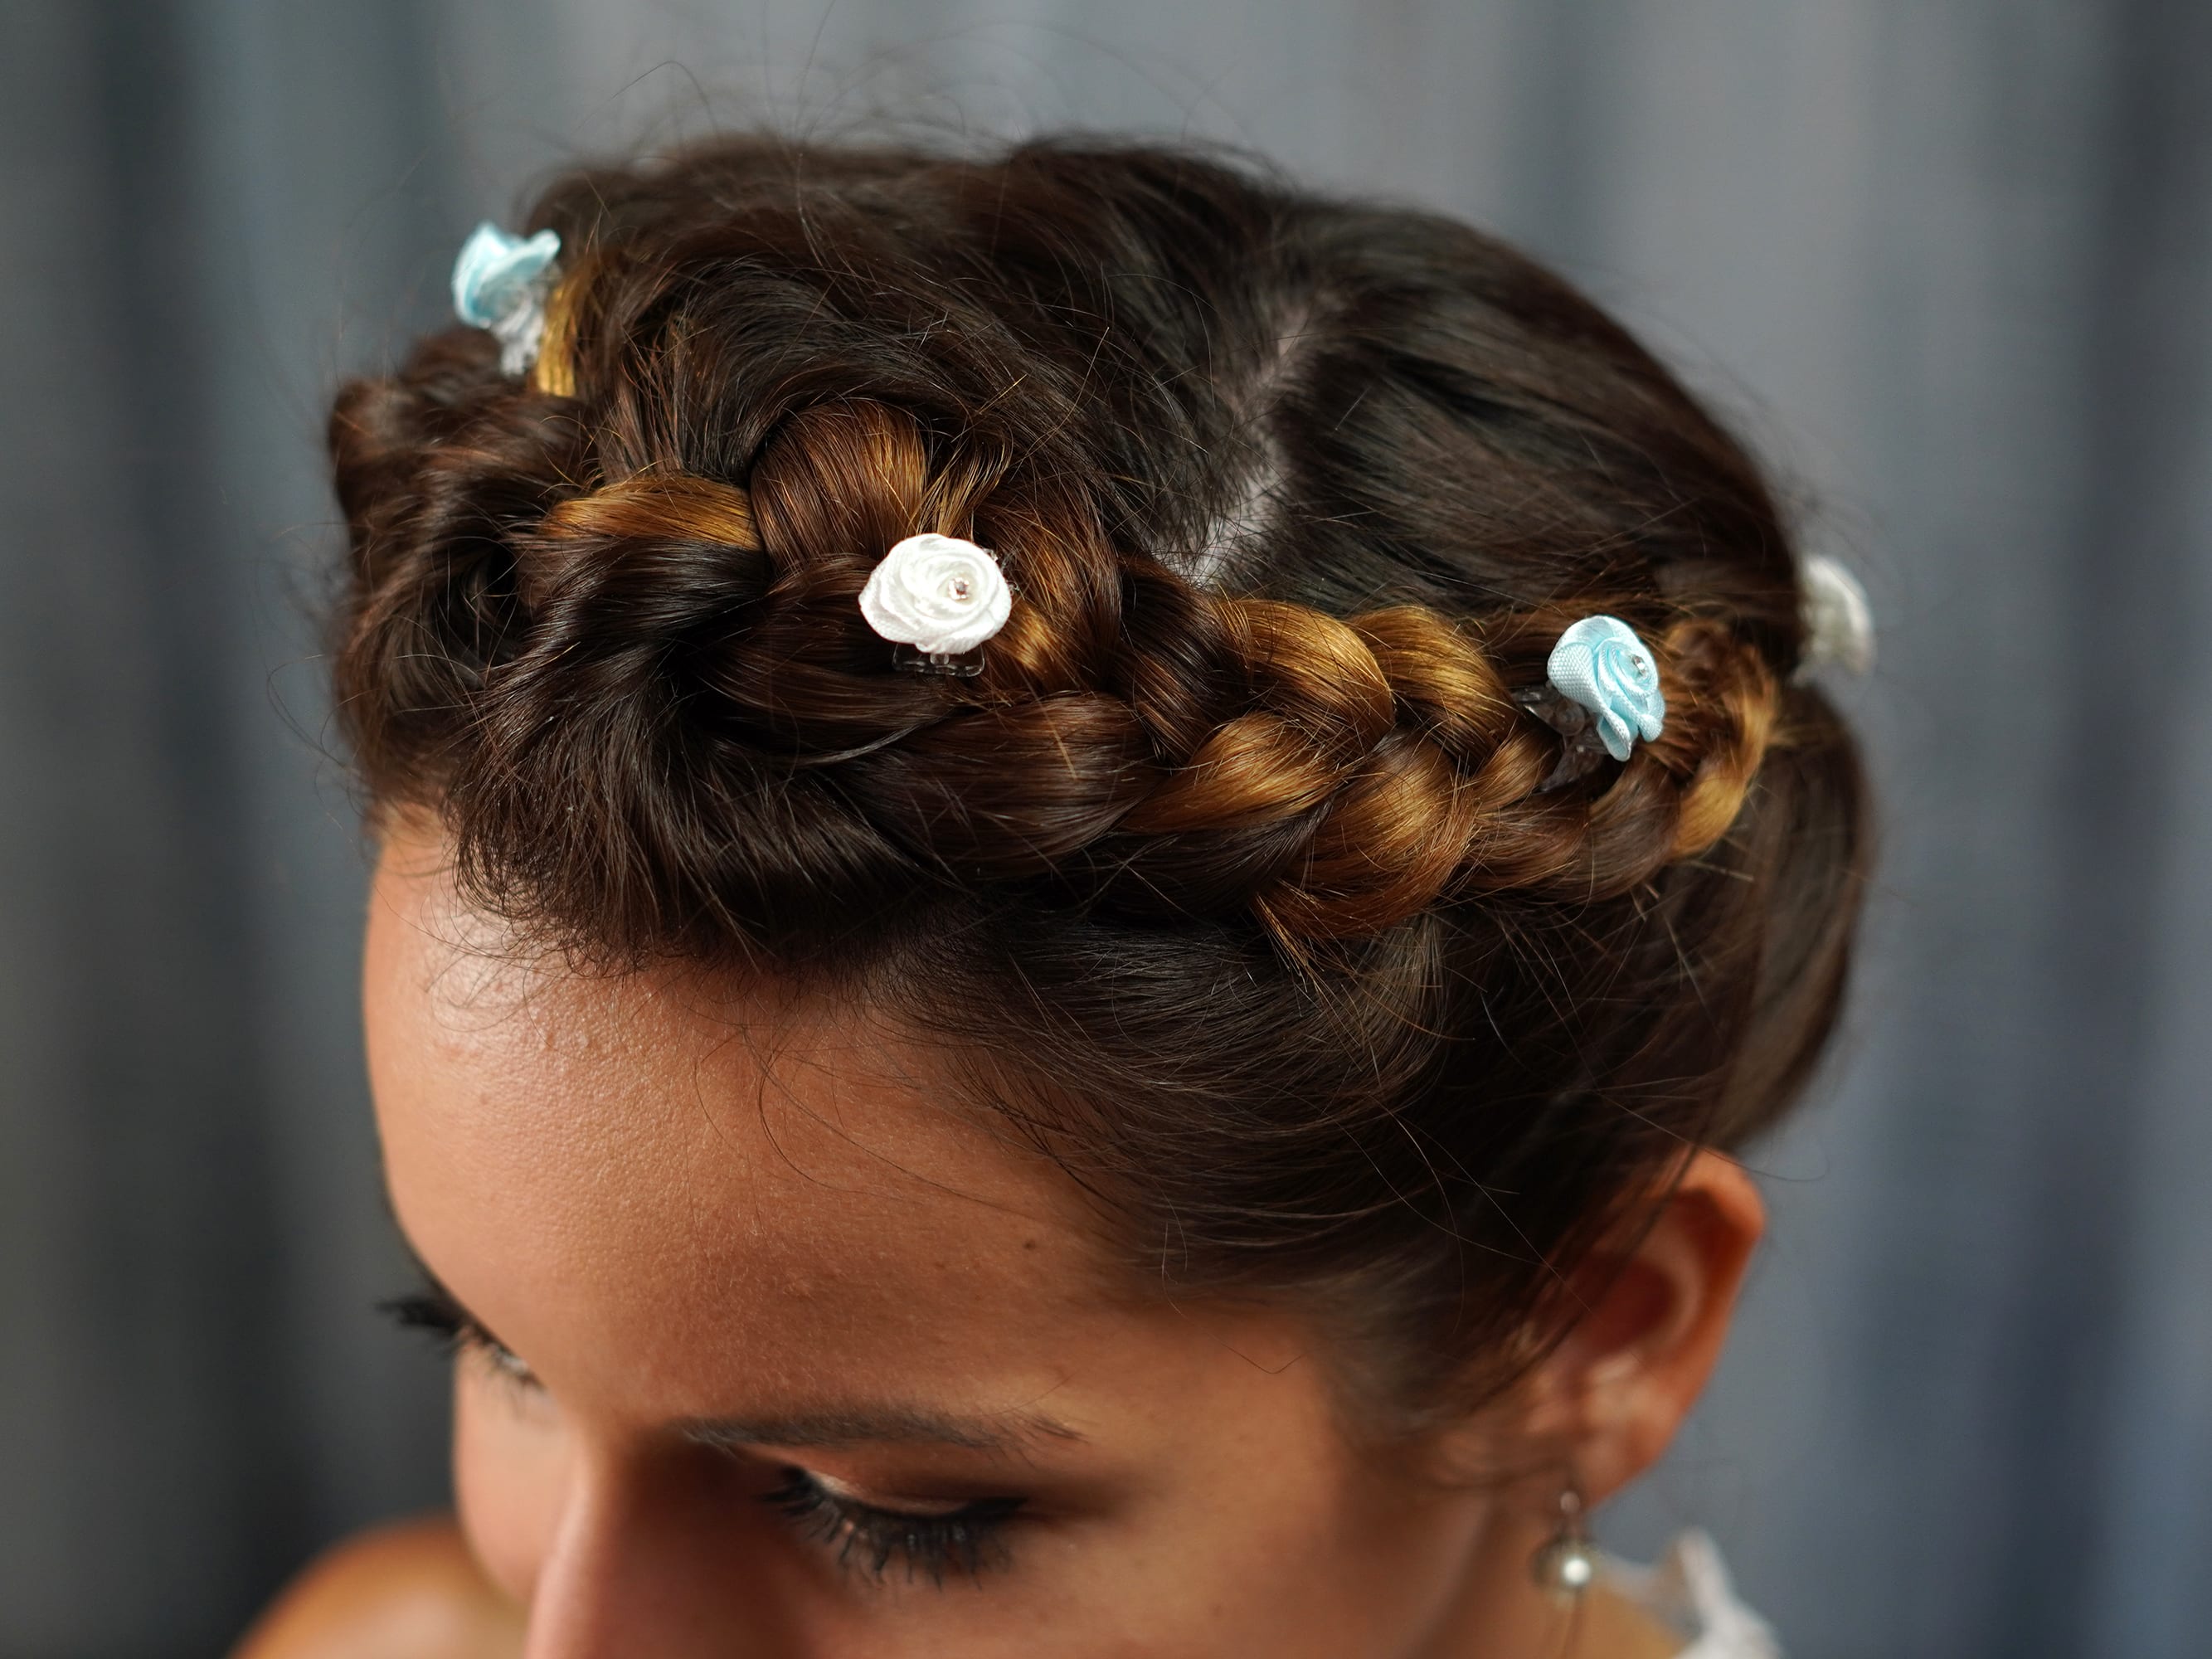 French Braid Hairstyle Decorated White Flowers Stock Photo 682960789 |  Shutterstock